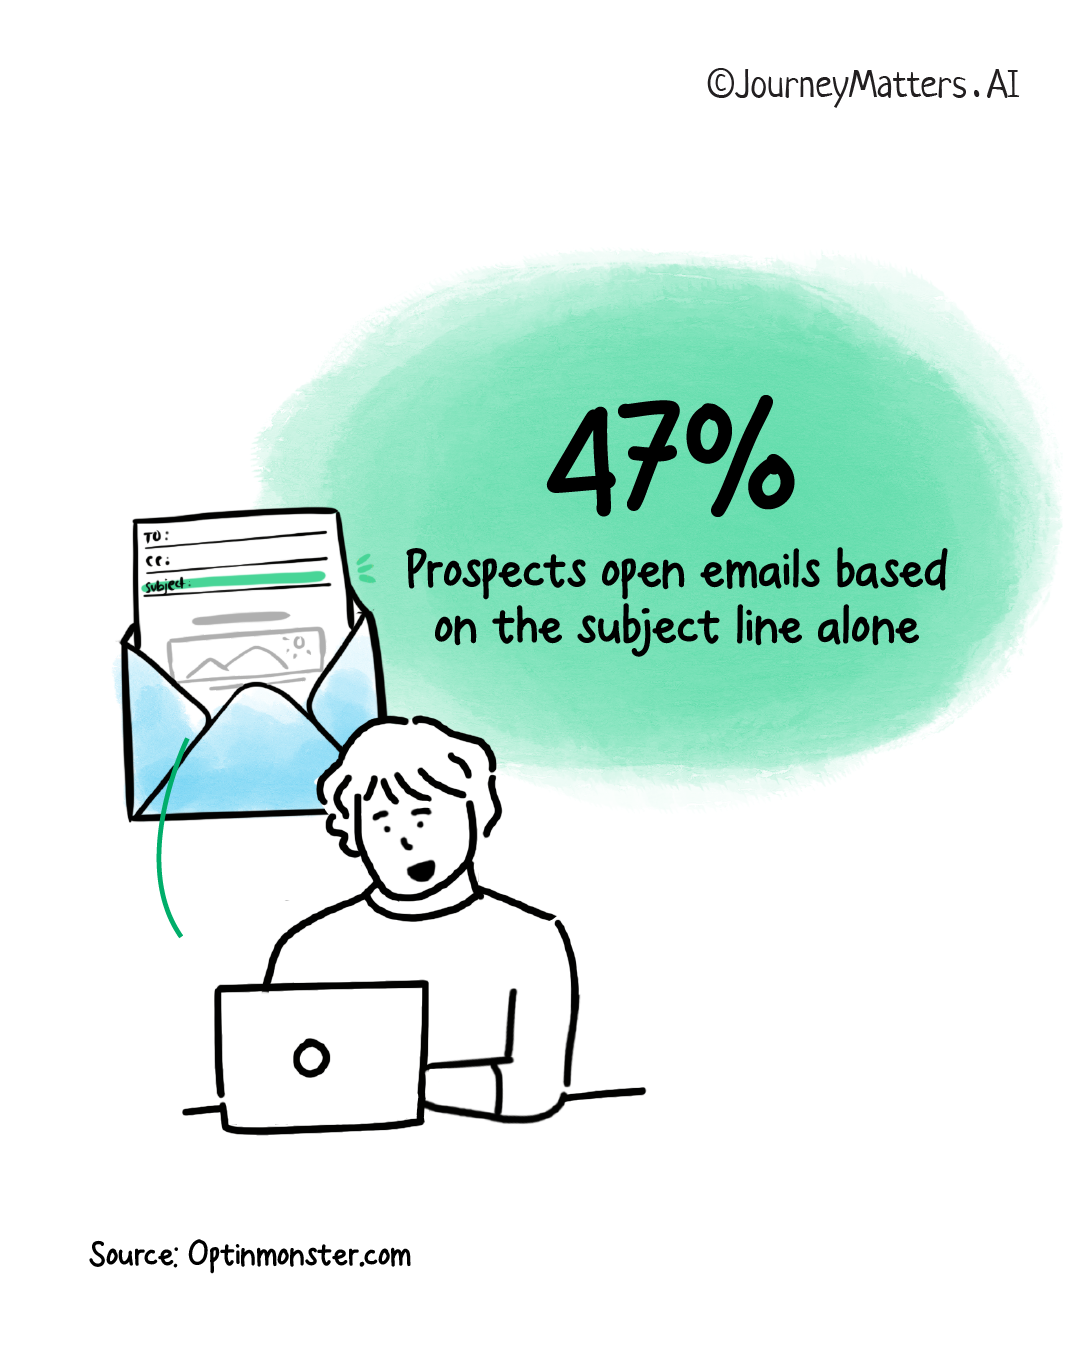 47% of prospects open emails based on the subject line